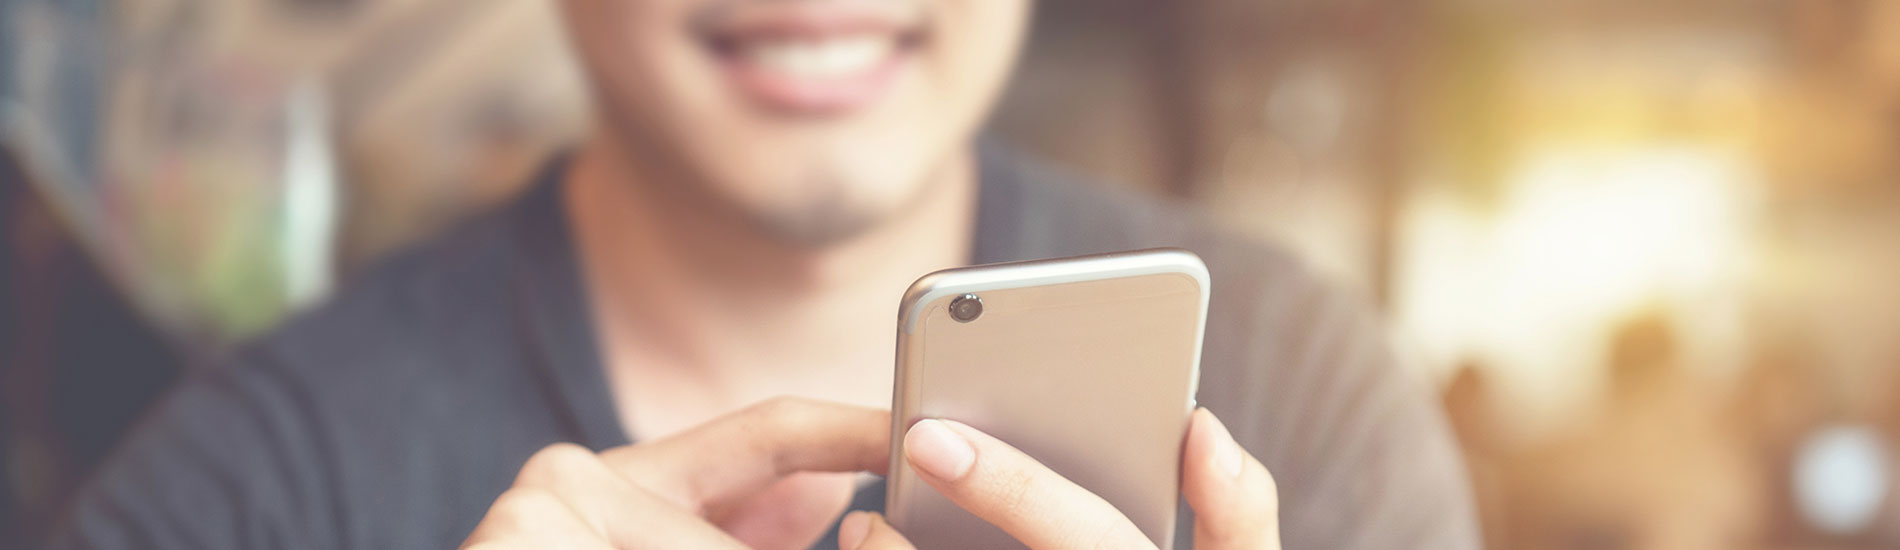 close-up of smiling man using smartphone